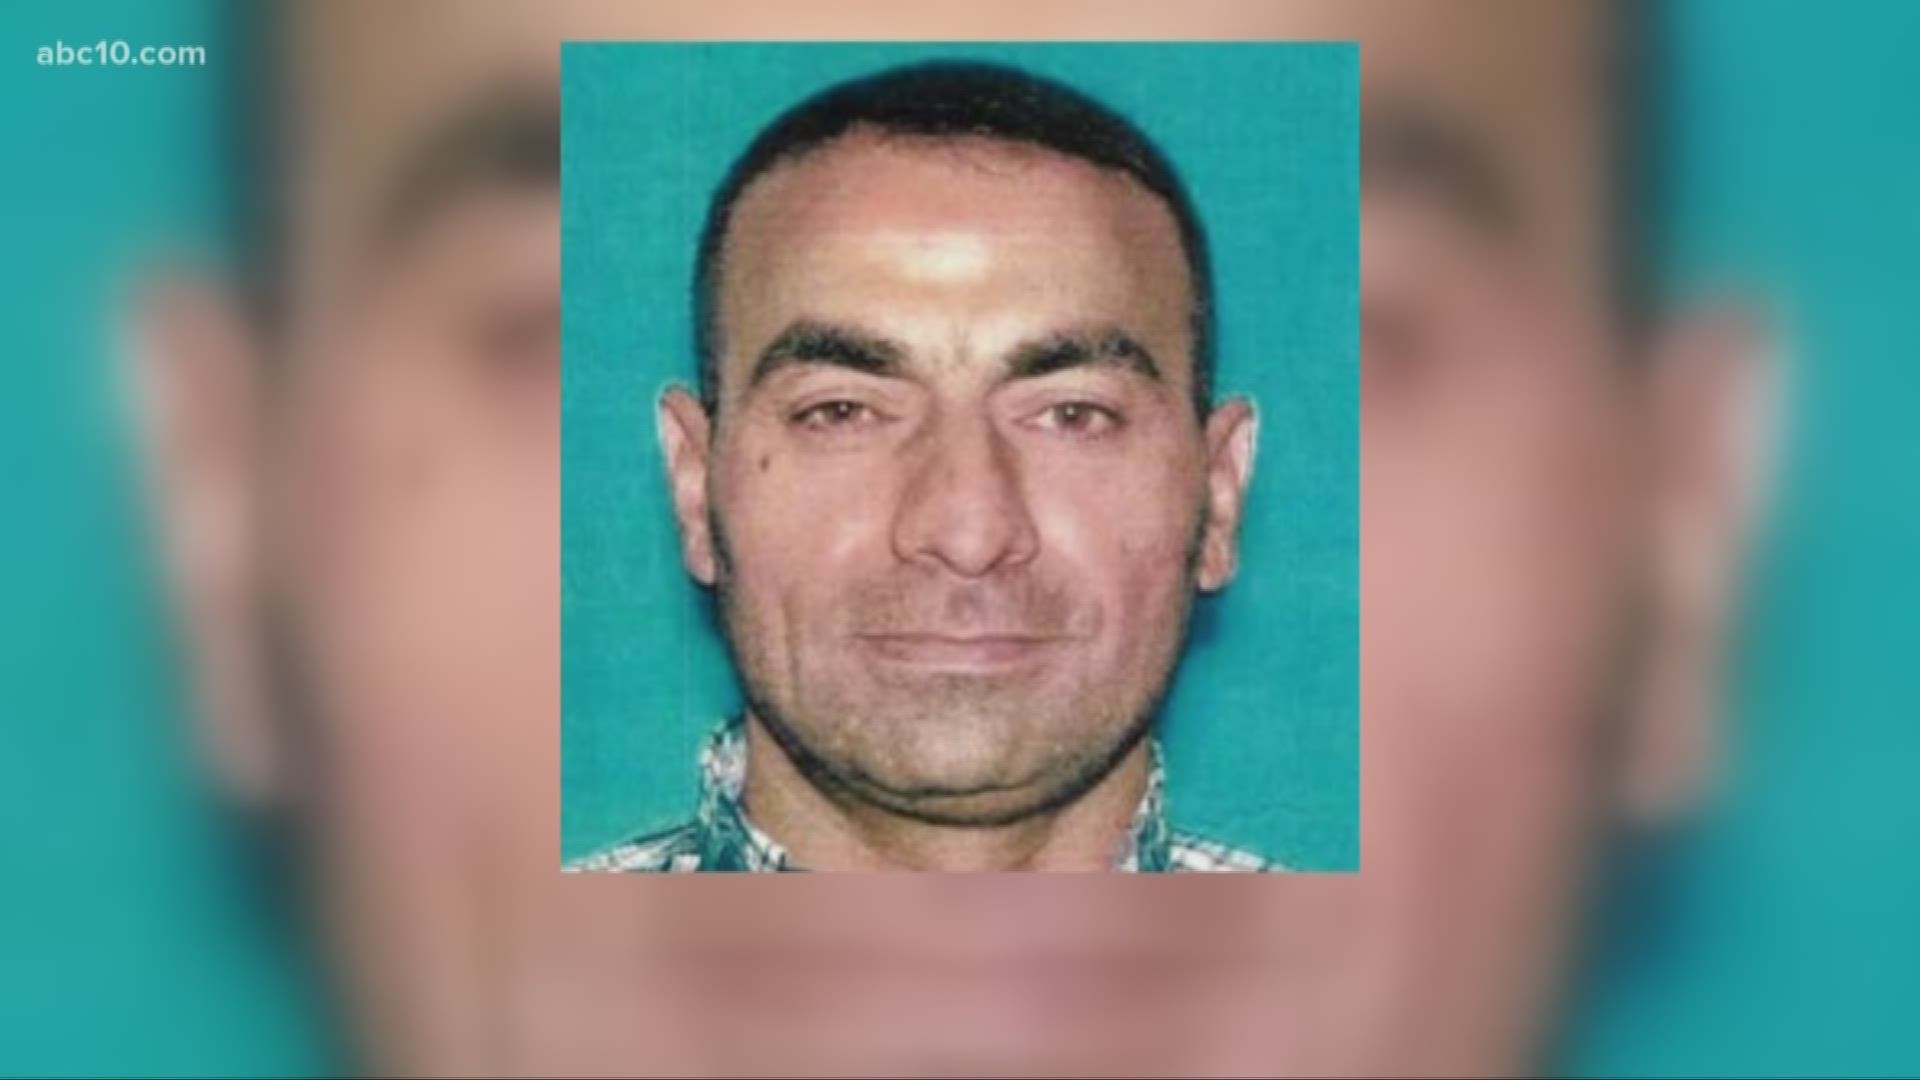 A suspected member of the terrorist group ISIS was arrested in Sacramento on Wednesday, accused of killing an Iraqi police officer in 2014.